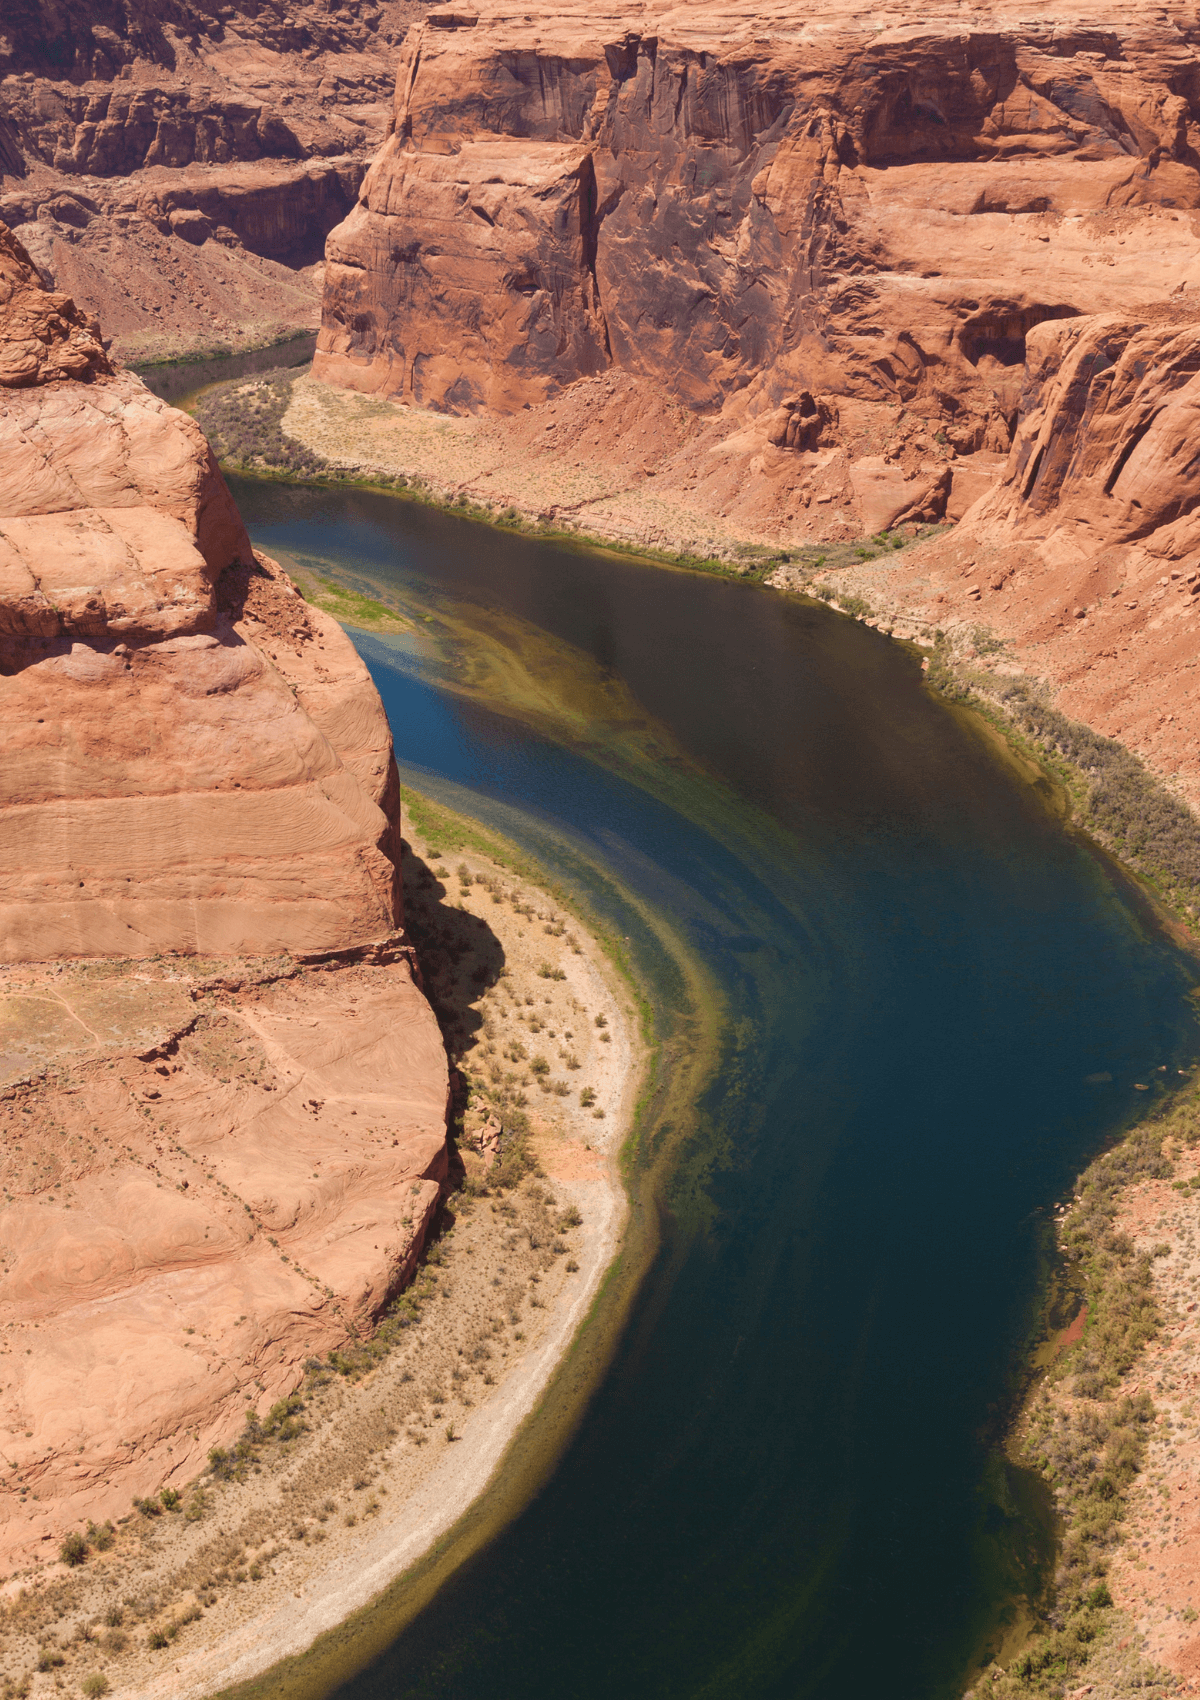 Horseshoe Bend, Arizona is top places to see near the Grand Canyon